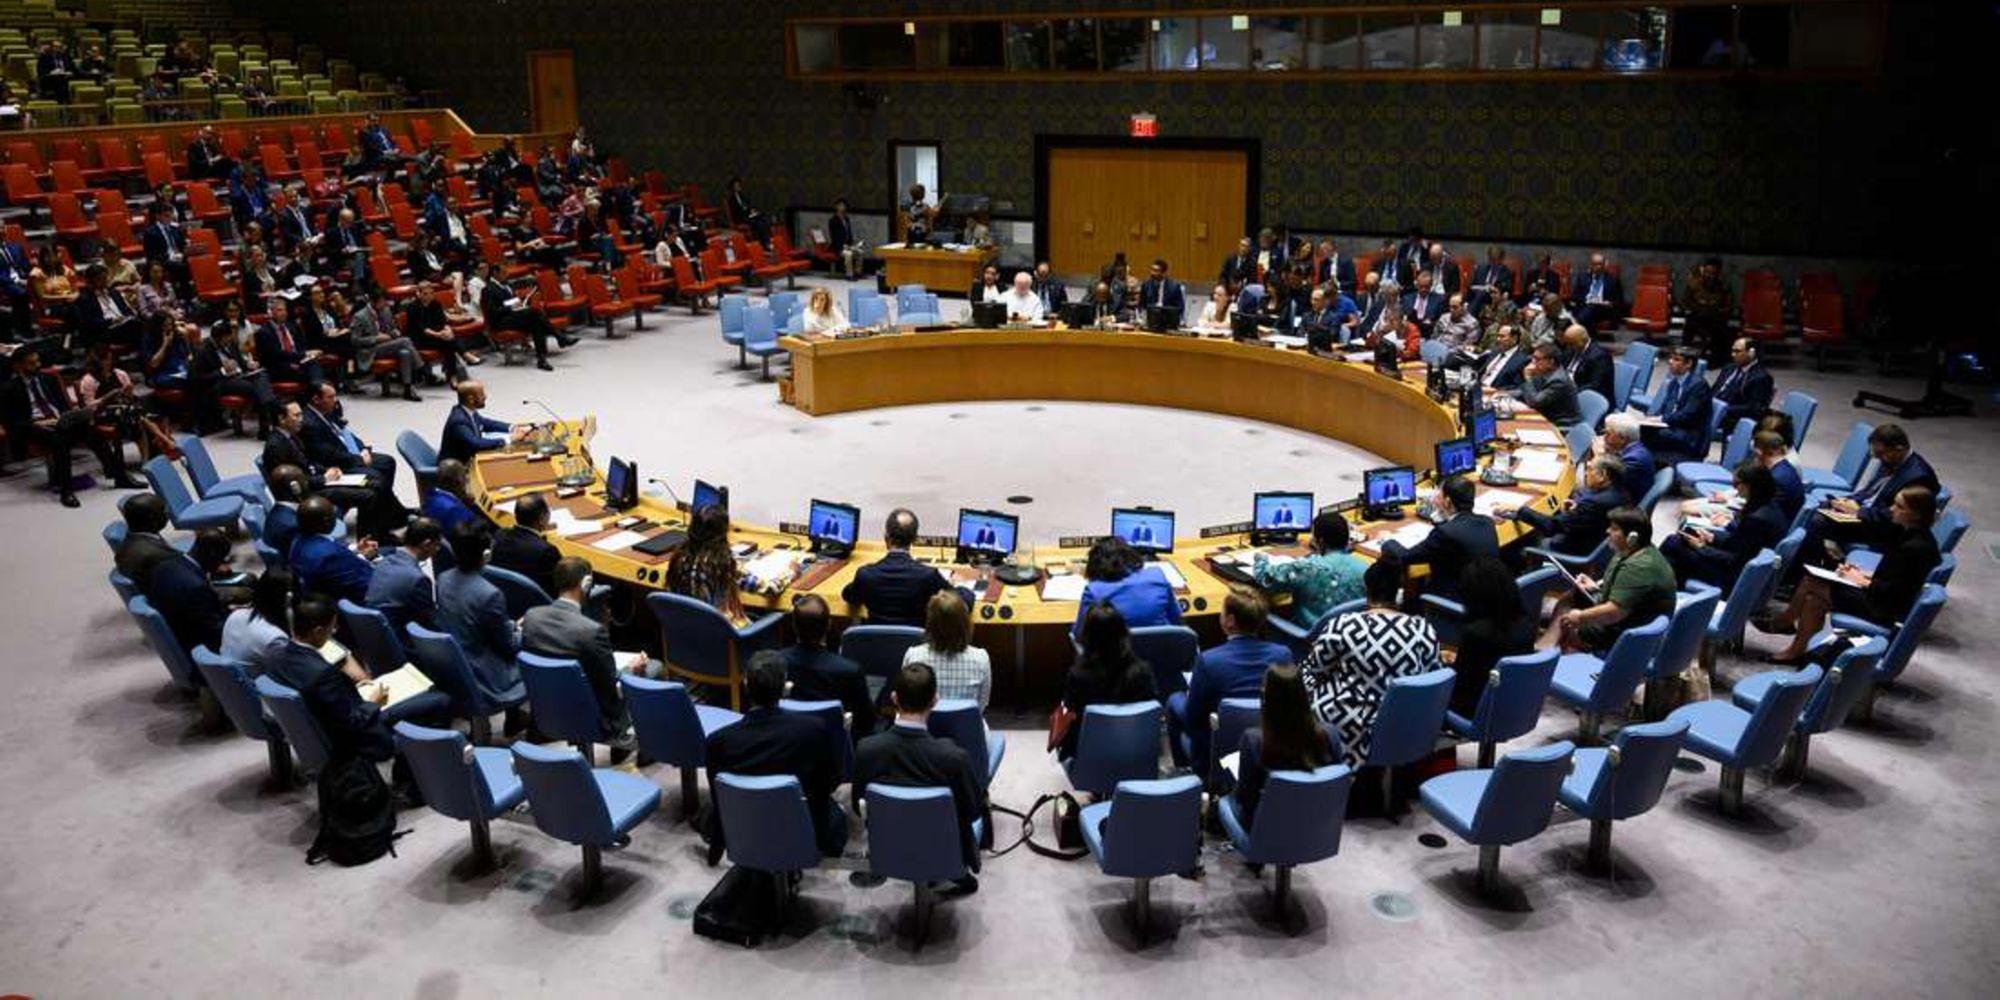 A past United Nations Security Council meeting in New York.where the africa group attended.